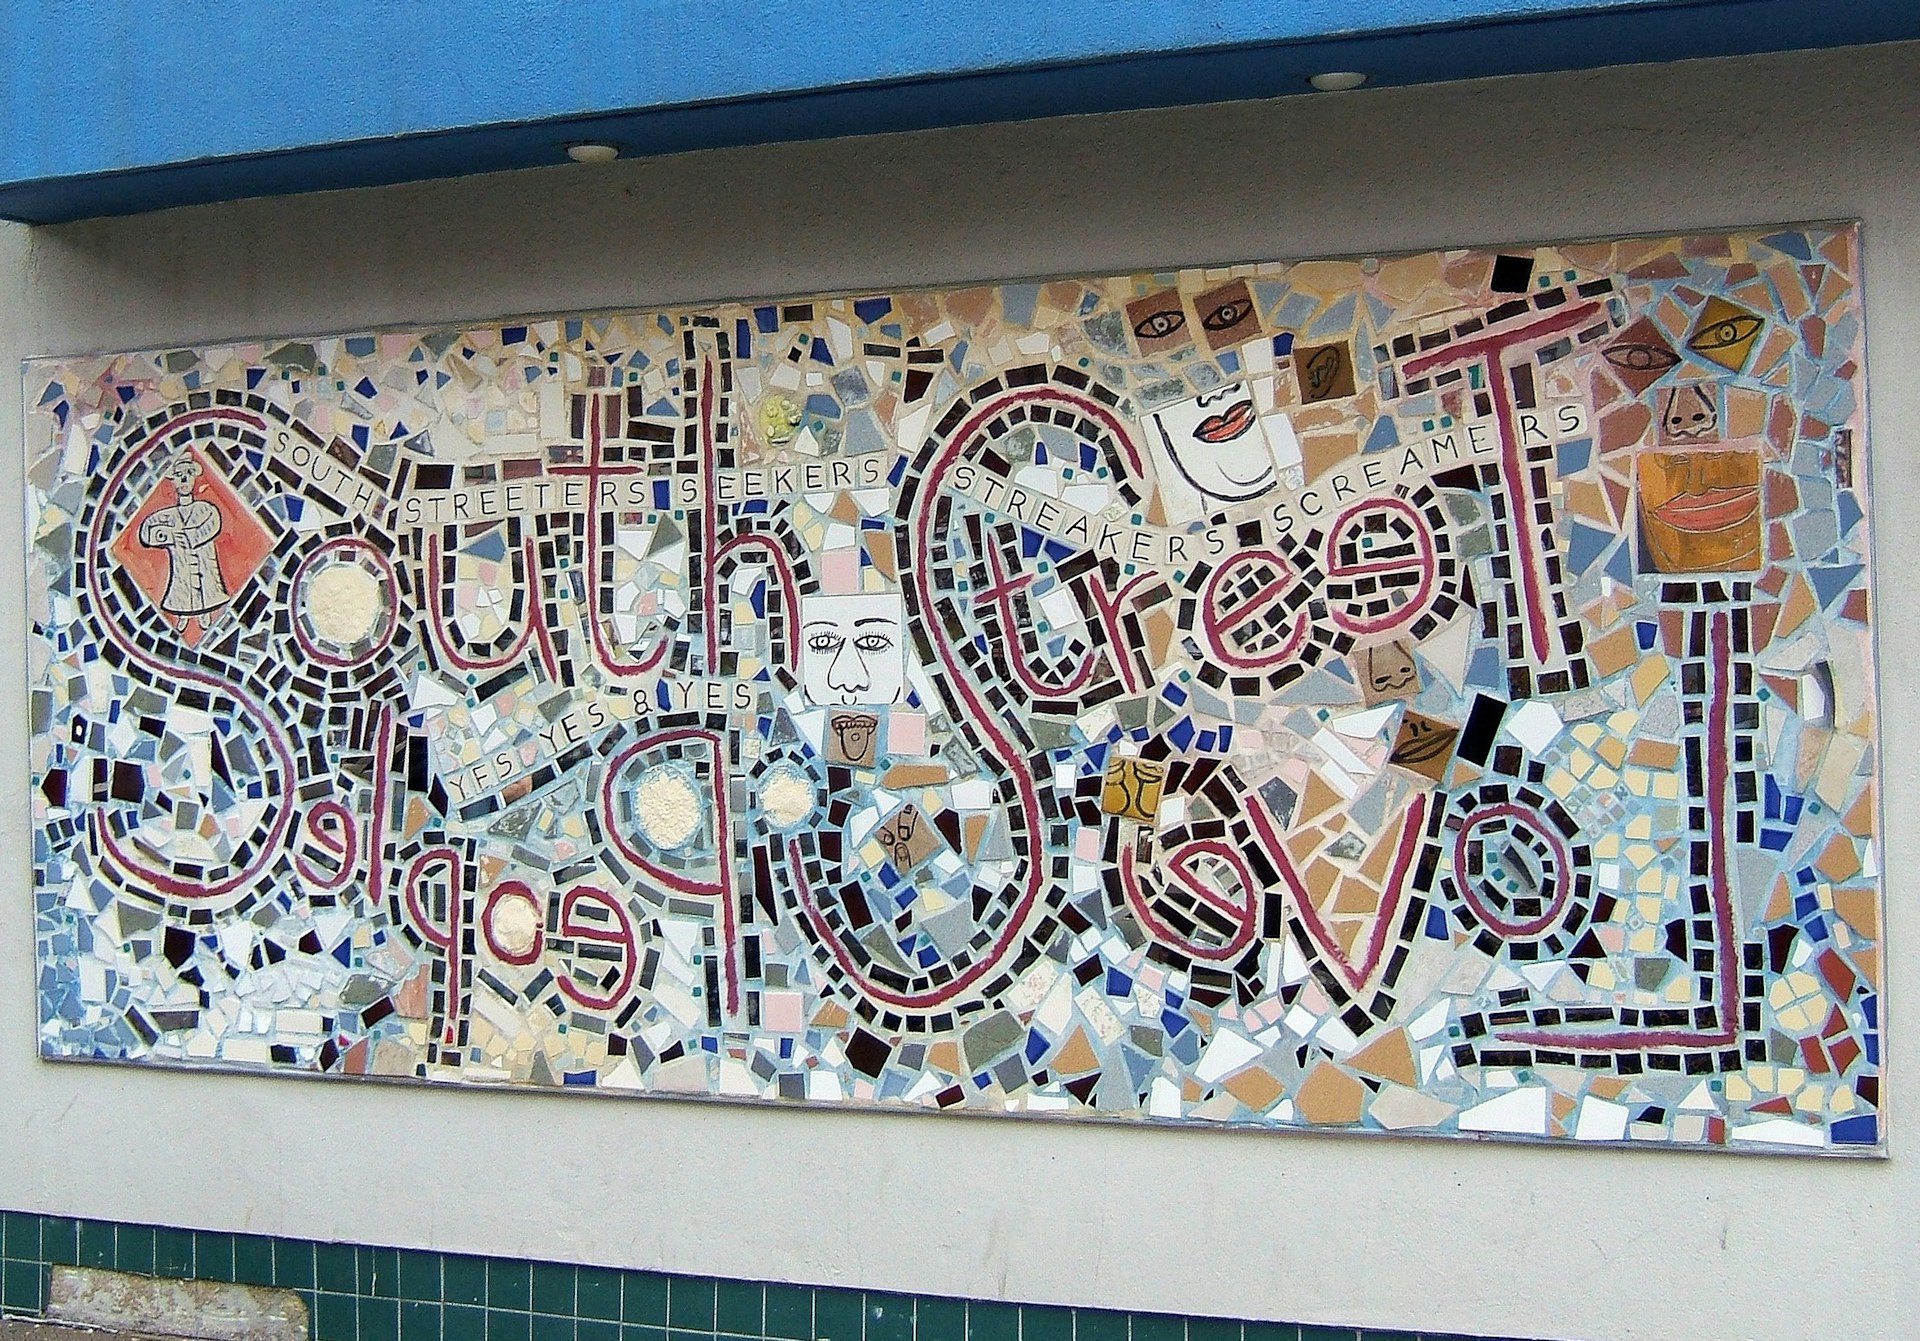 South Street Loves People mosaic by Isaiah Zagar. Image by Tony Fischer / CC BY 2.0